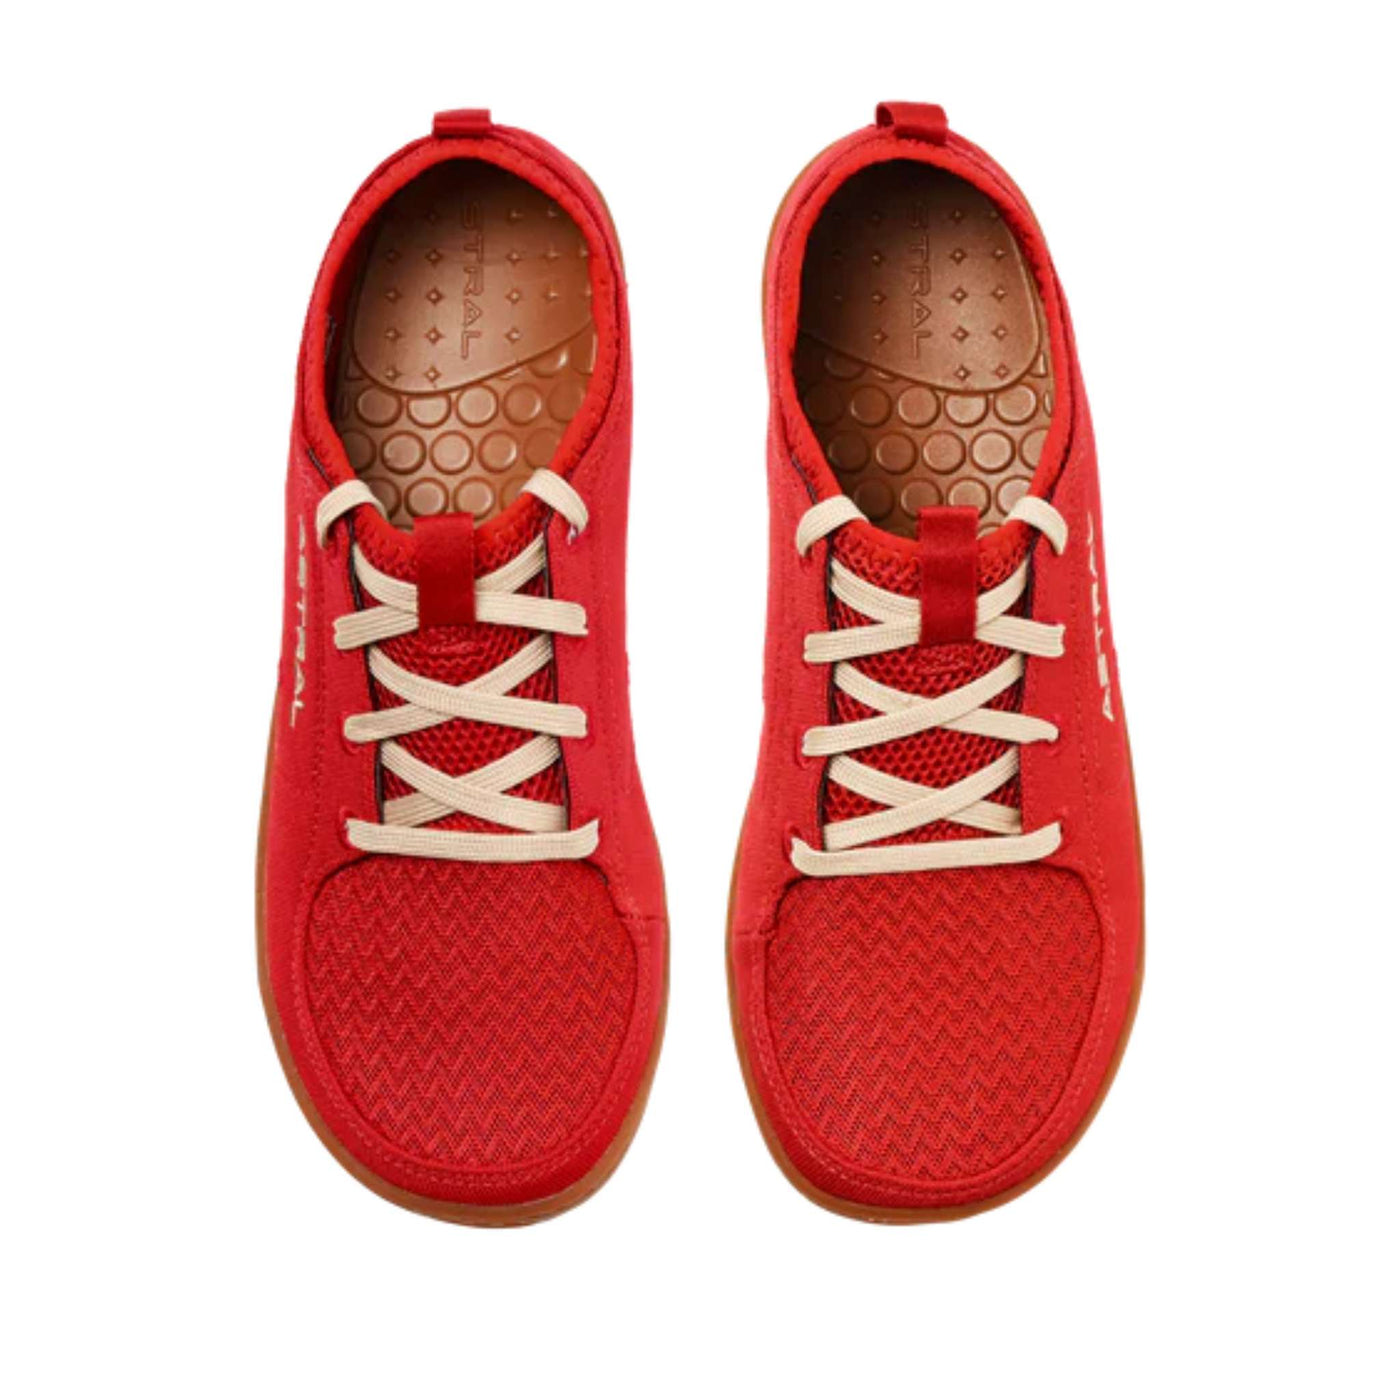 Astral Loyak Womens Shoe | Astral NZ | River and Boat Shoe | Further Faster Christchurch NZ #rosa-red